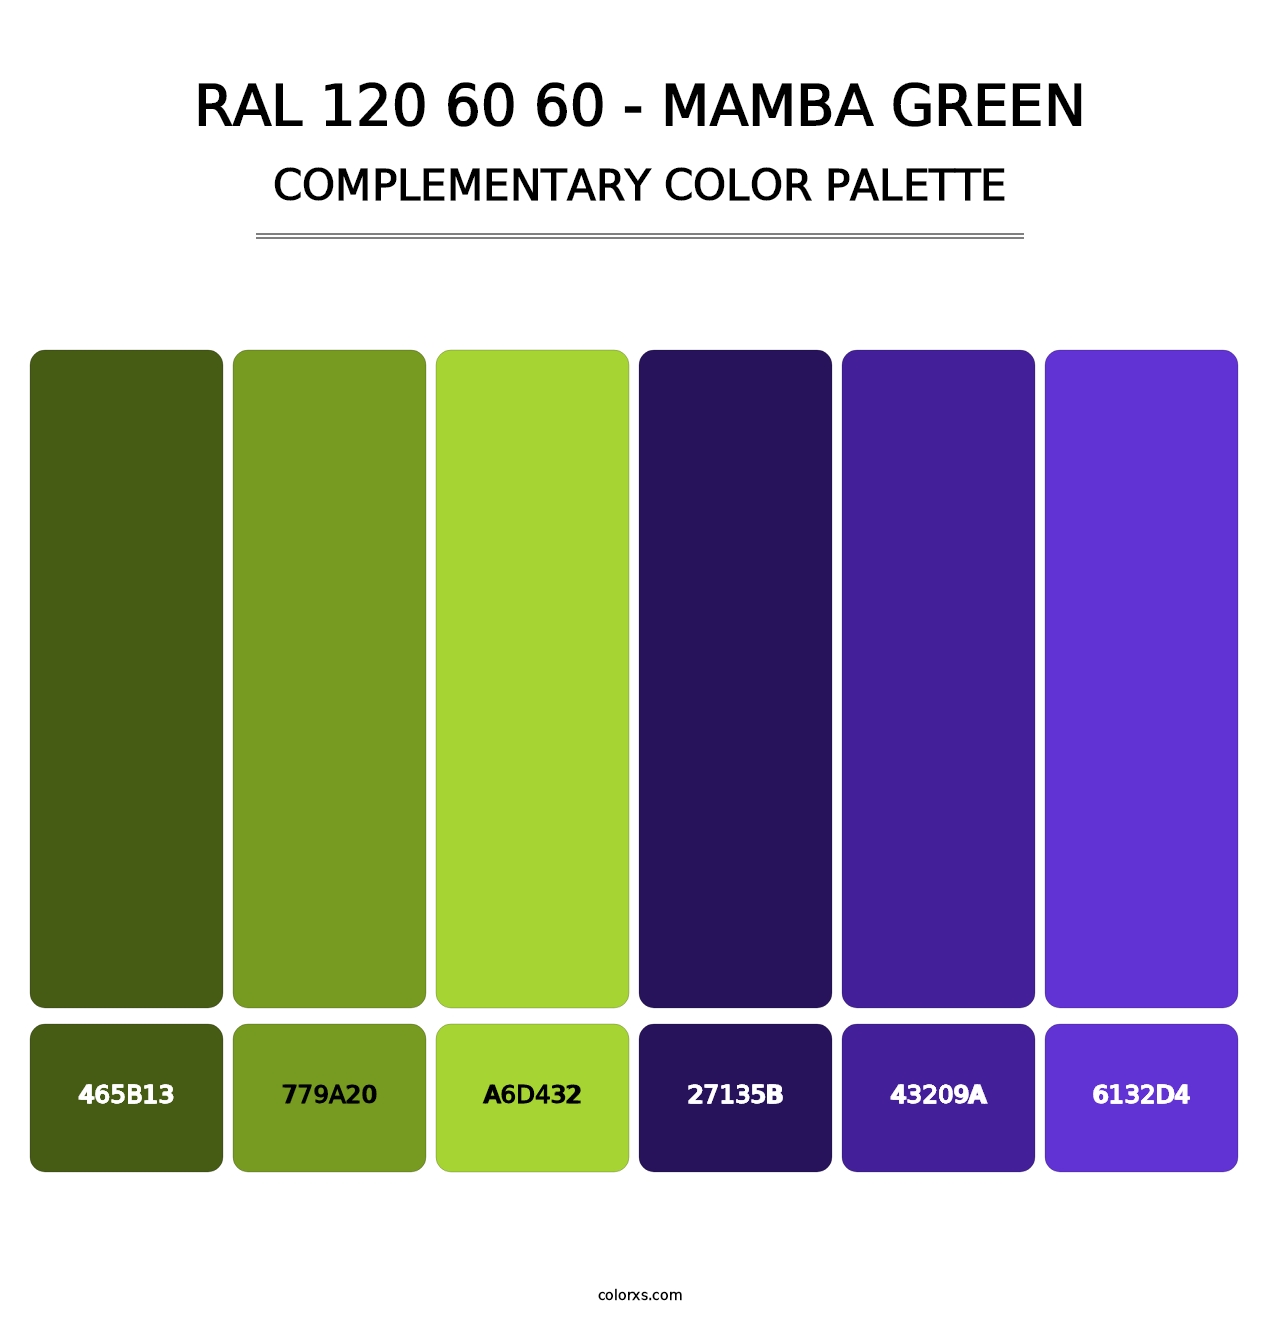 RAL 120 60 60 - Mamba Green - Complementary Color Palette